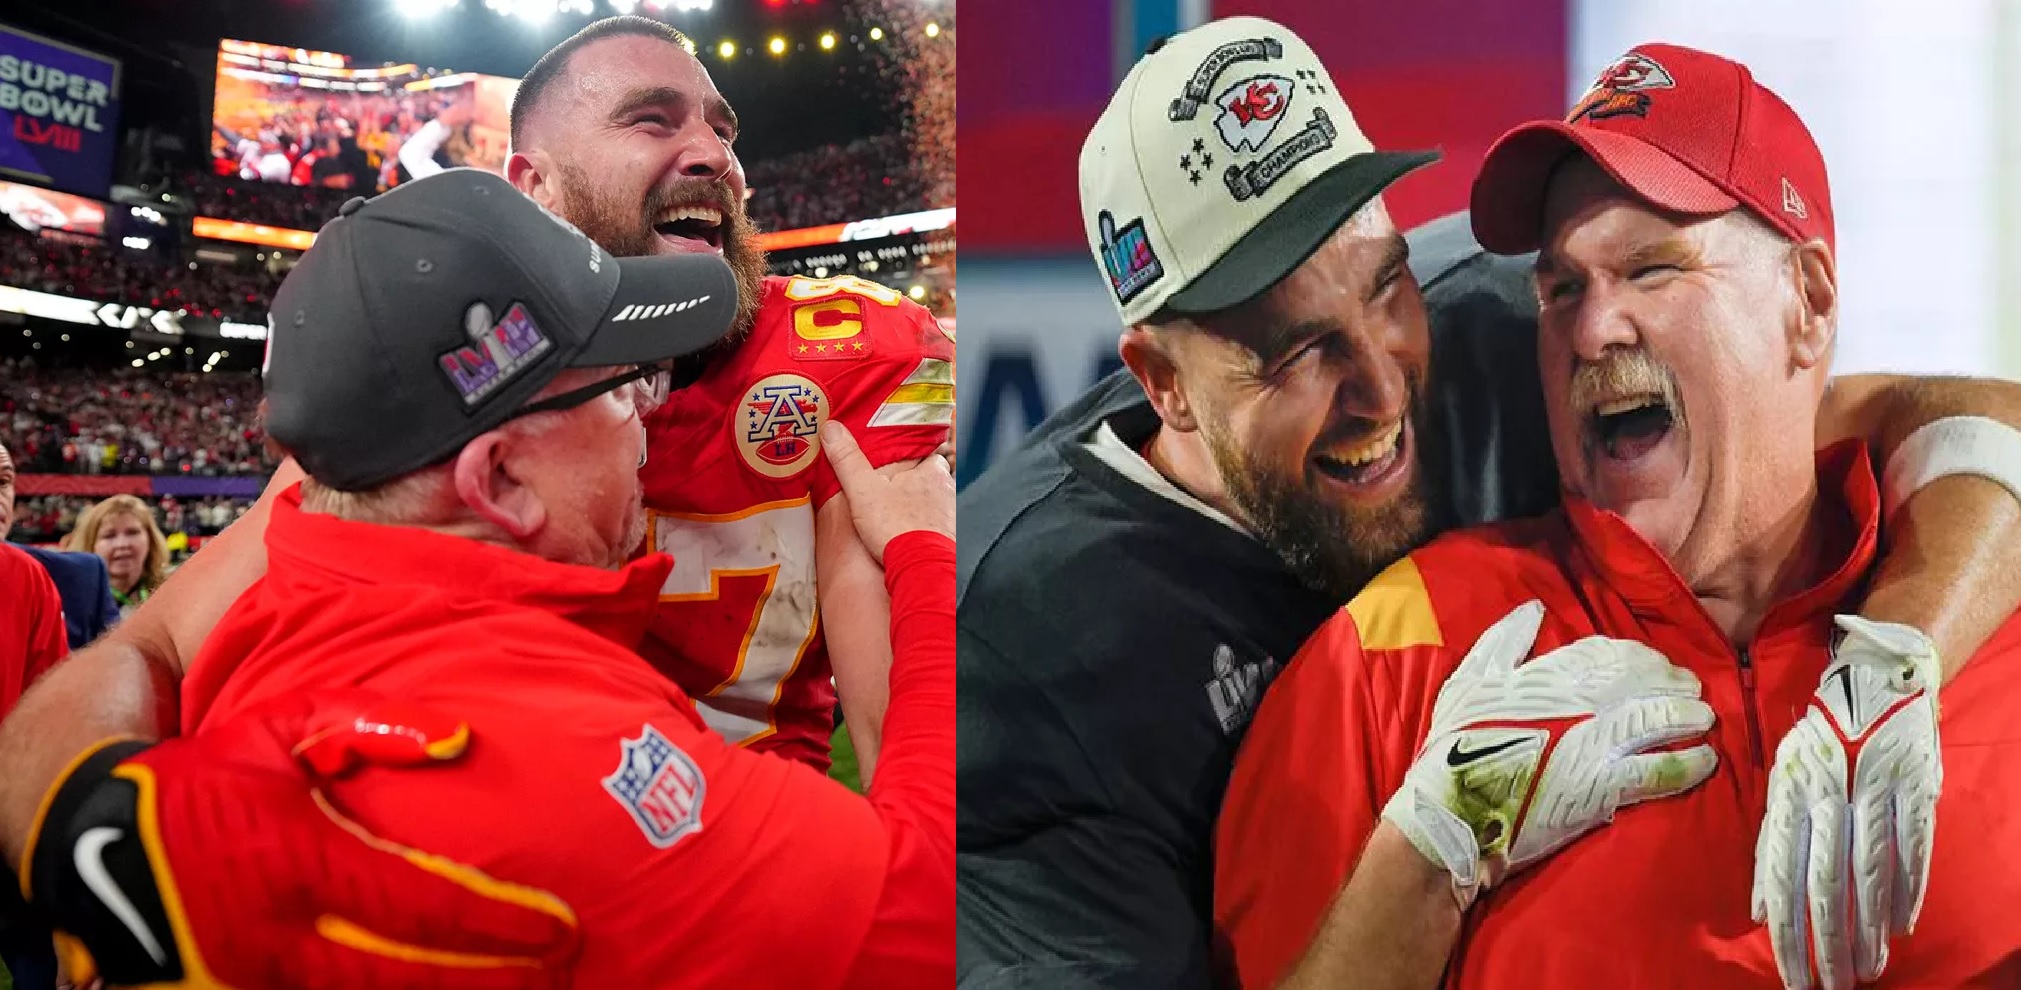 Travis kelce cries out: "I love coach Reid, he knows how much i love to play for him, and we have both shared nice moments together playing for him" 'wonder why i'm getting criticized'